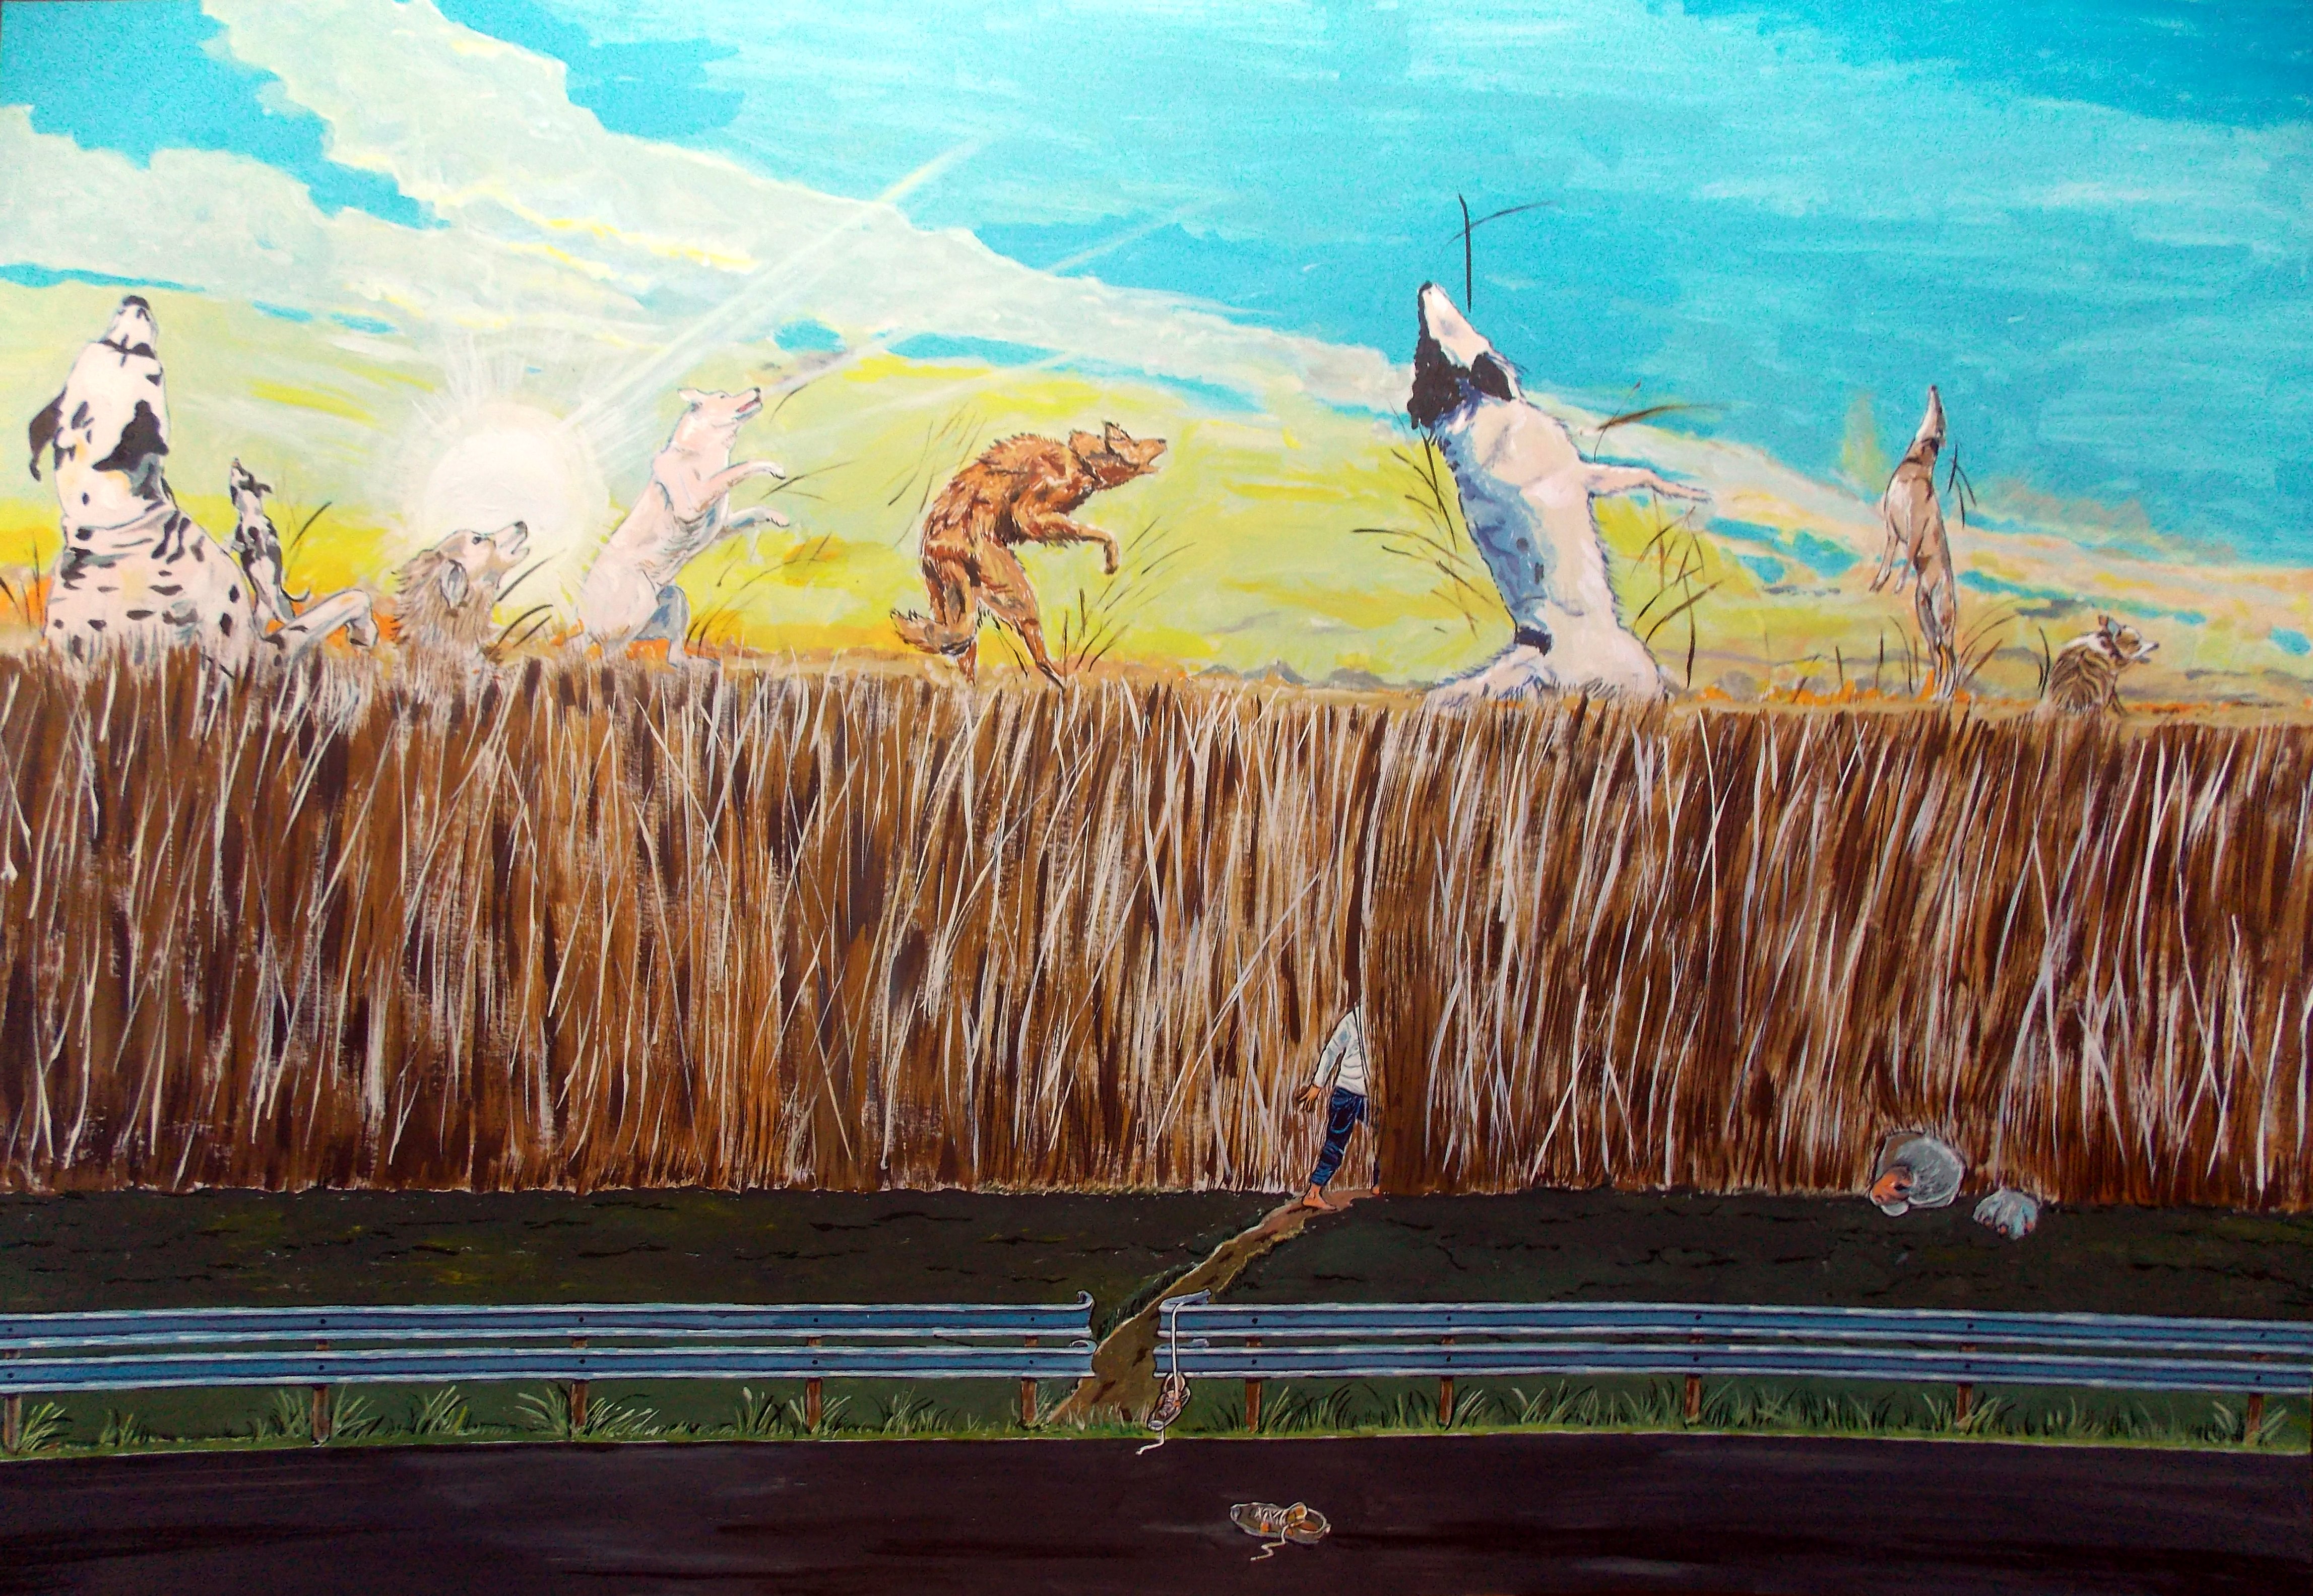 Lazaro Hurtado; Going Away With The Dogs, 2015, Original Painting Acrylic, 100 x 70 cm. Artwork description: 241 Illustrated thoughtsOriginal painting by Lazaro Hurtado.  Processing 3 business days.  Sent rolled in a tube with certificate of authenticityDogs, pets, surrealism, expressionism, conceptual, landscape, ...